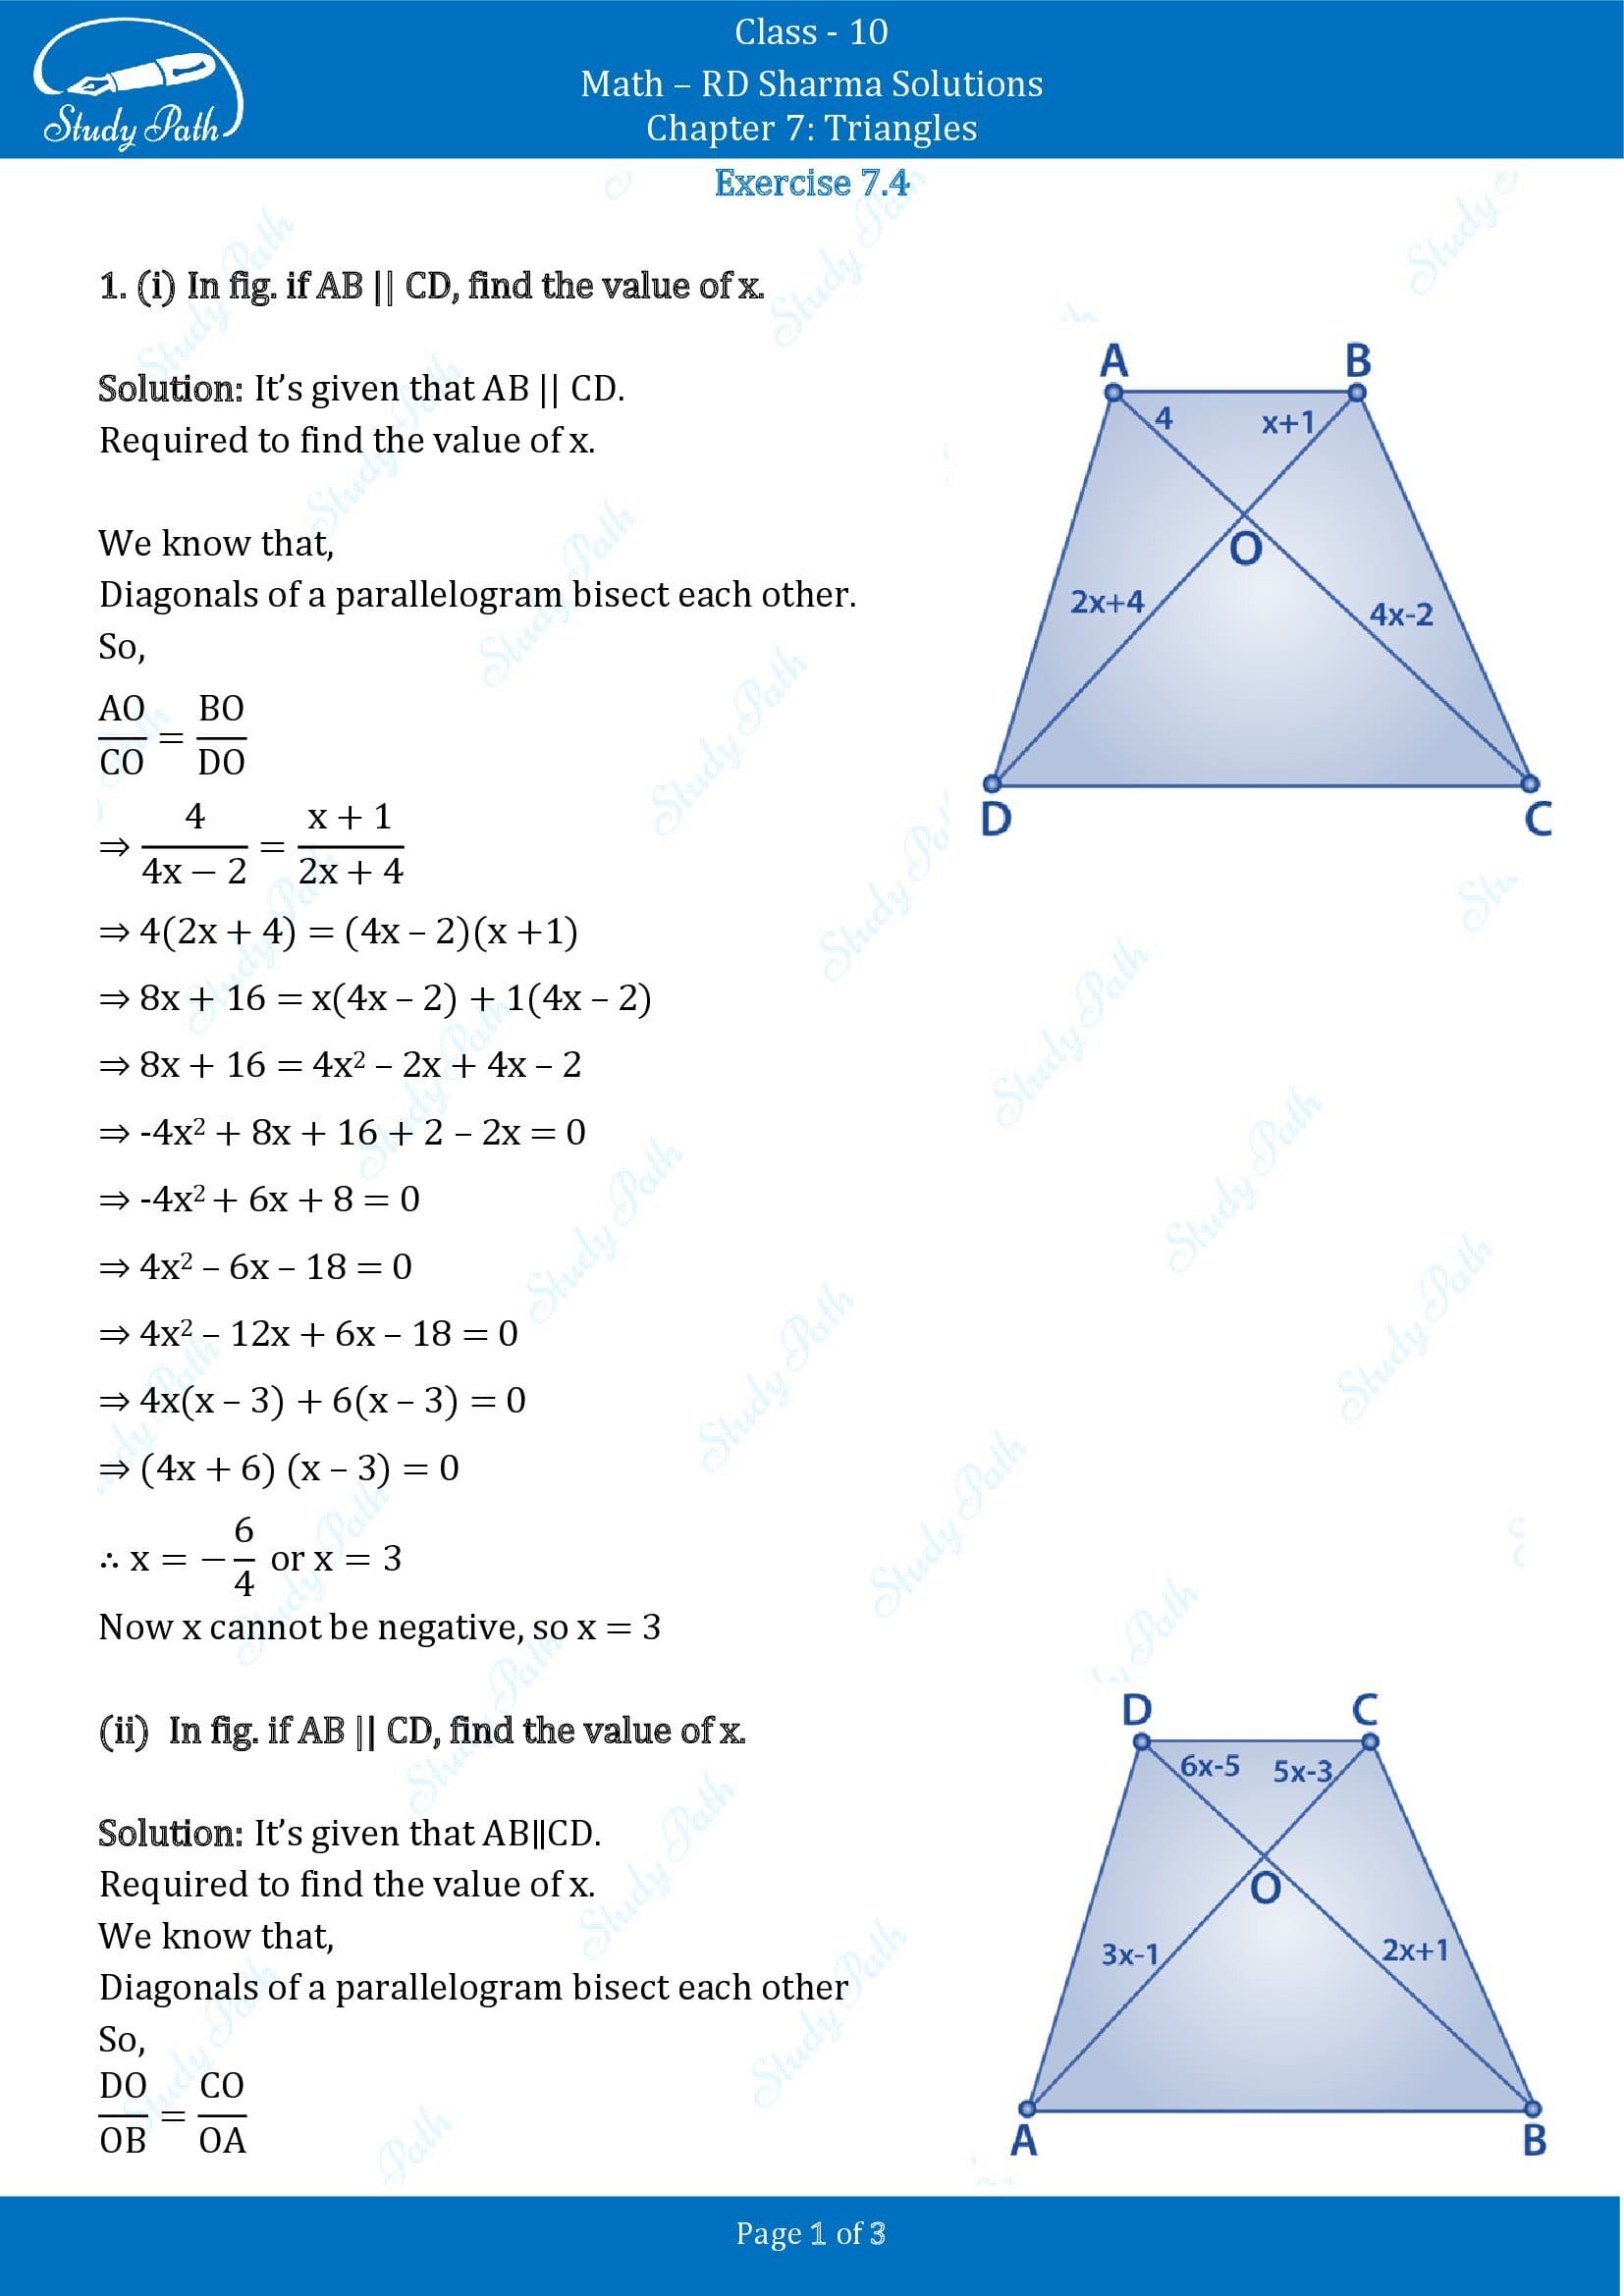 RD Sharma Solutions Class 10 Chapter 7 Triangles Exercise 7.4 00001